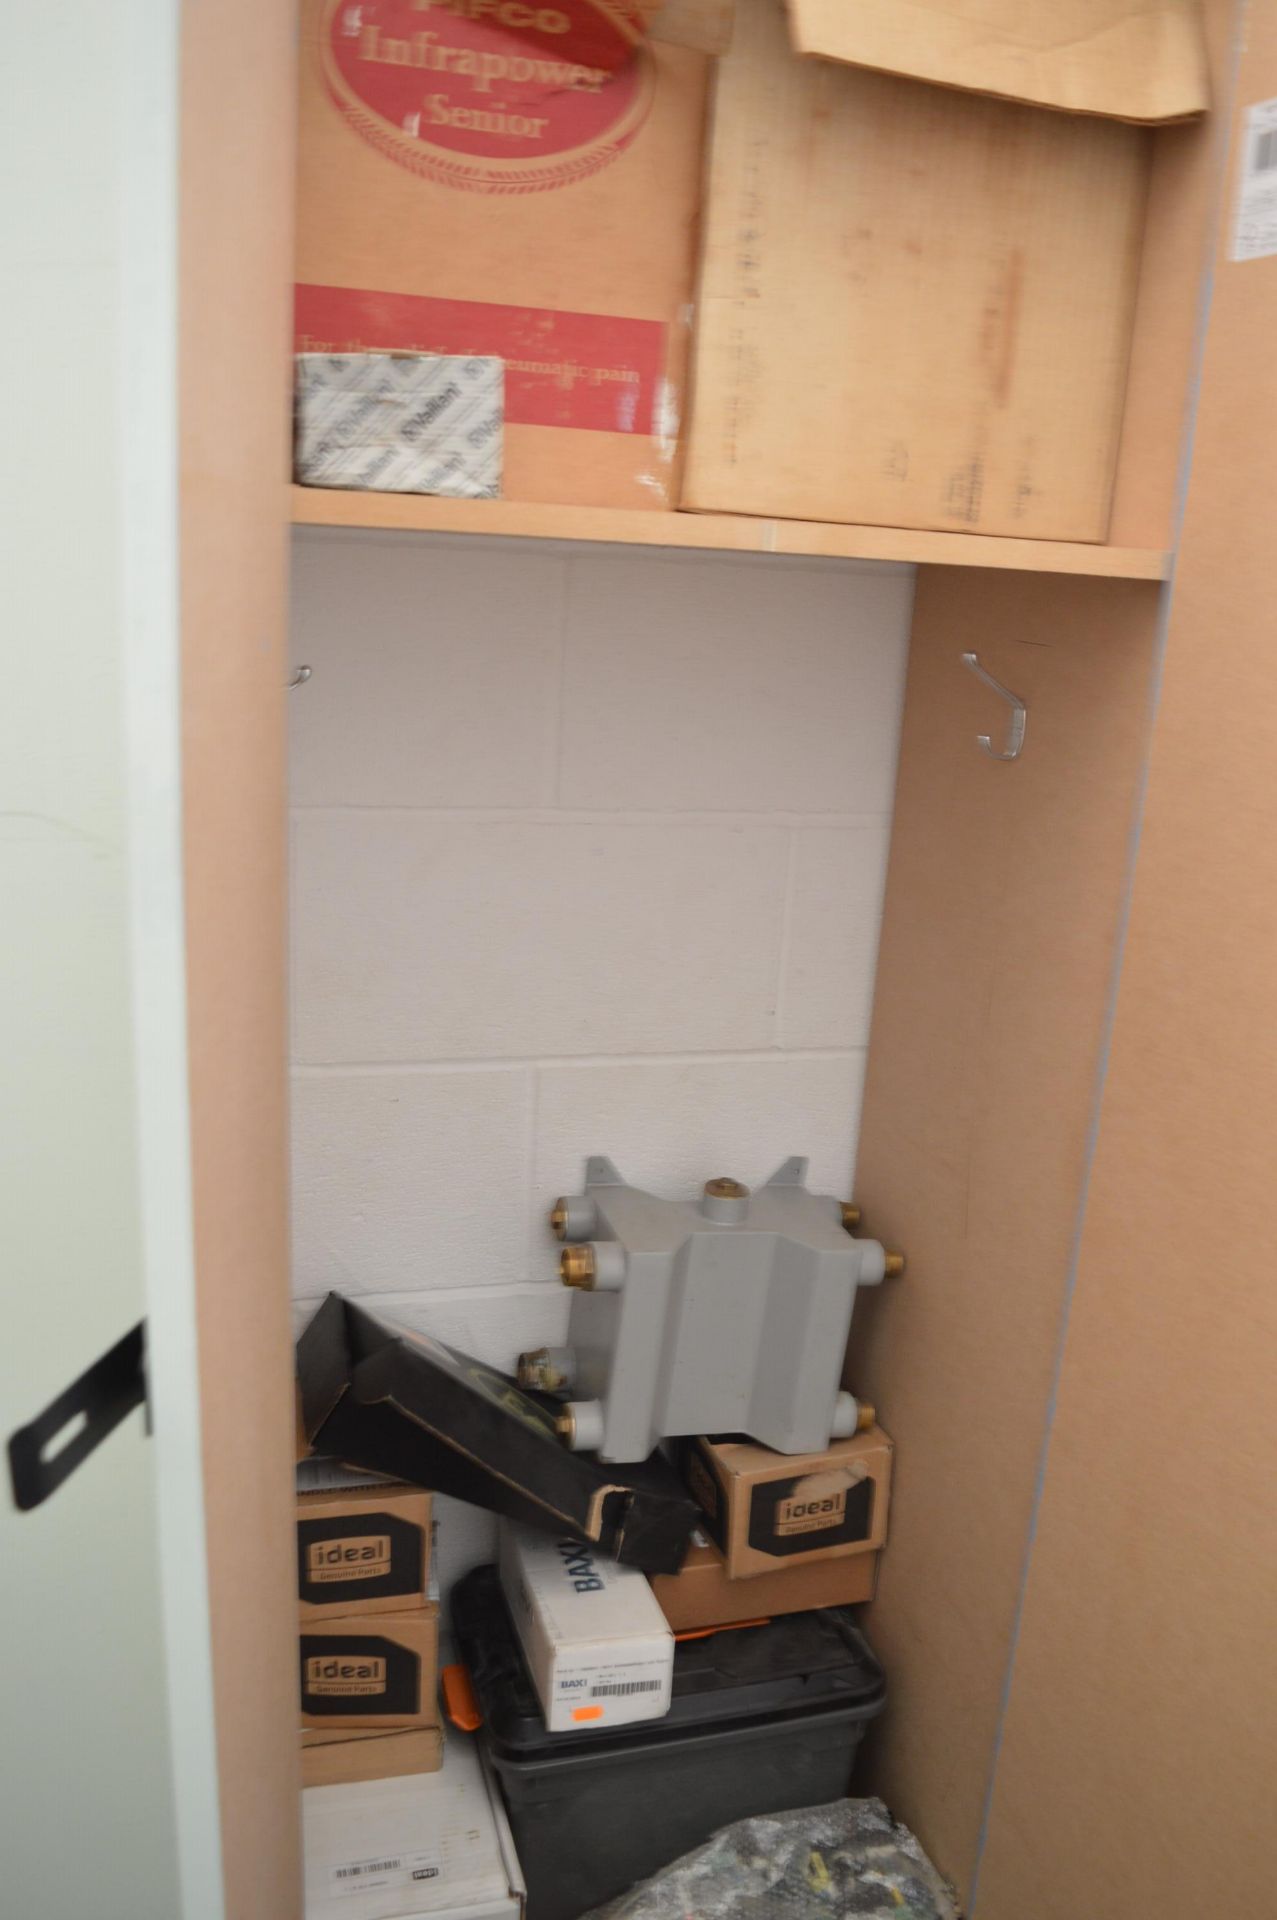 *Contents of a Locker; Various Ideal Parts, Boiler Parts, Circuit Boards, Lights, etc.